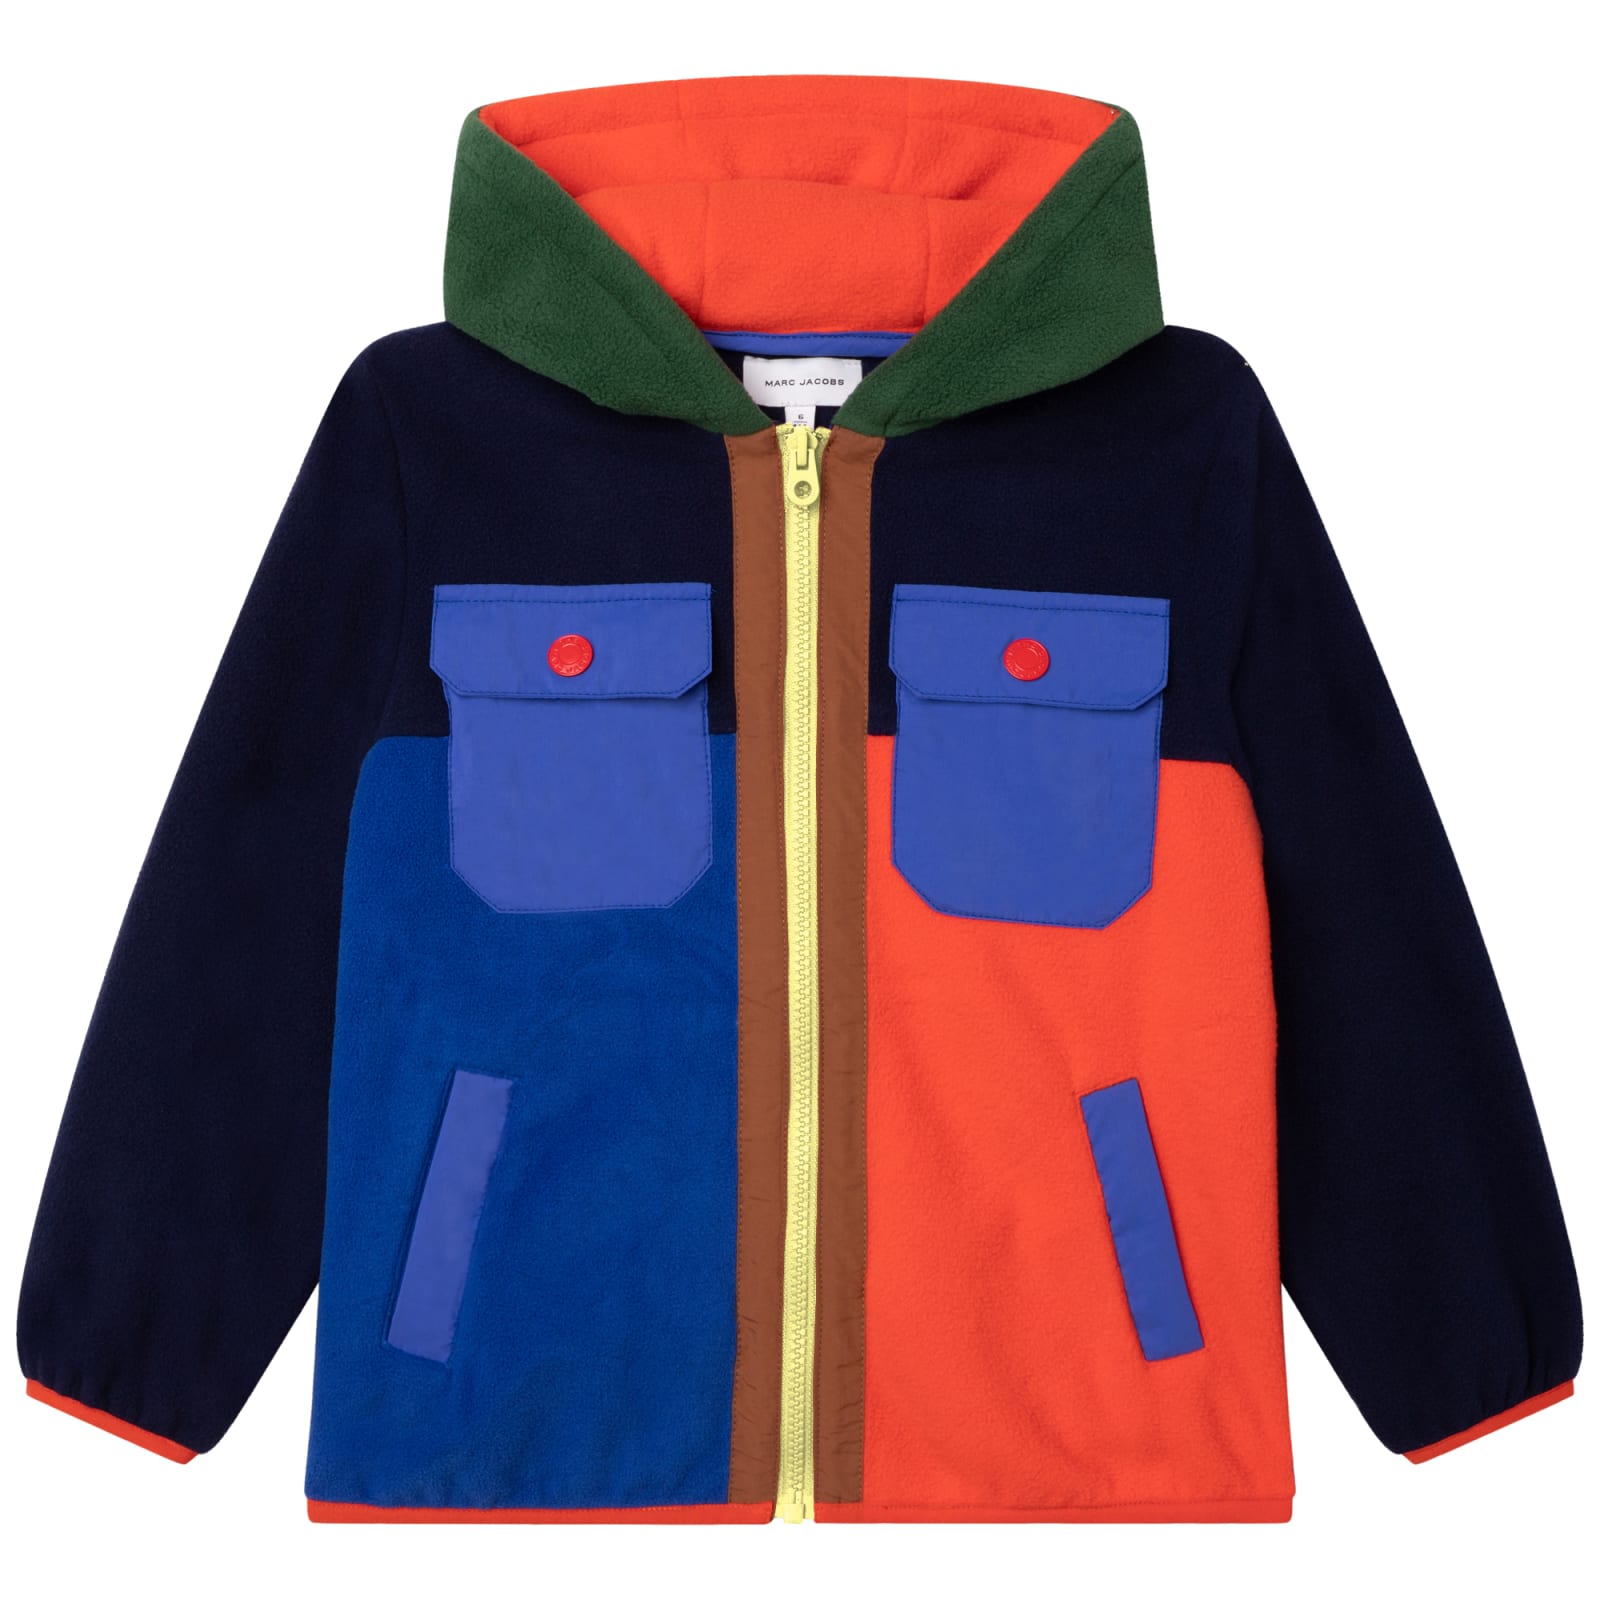 MARC JACOBS JACKET WITH COLOR-BLOCK DESIGN